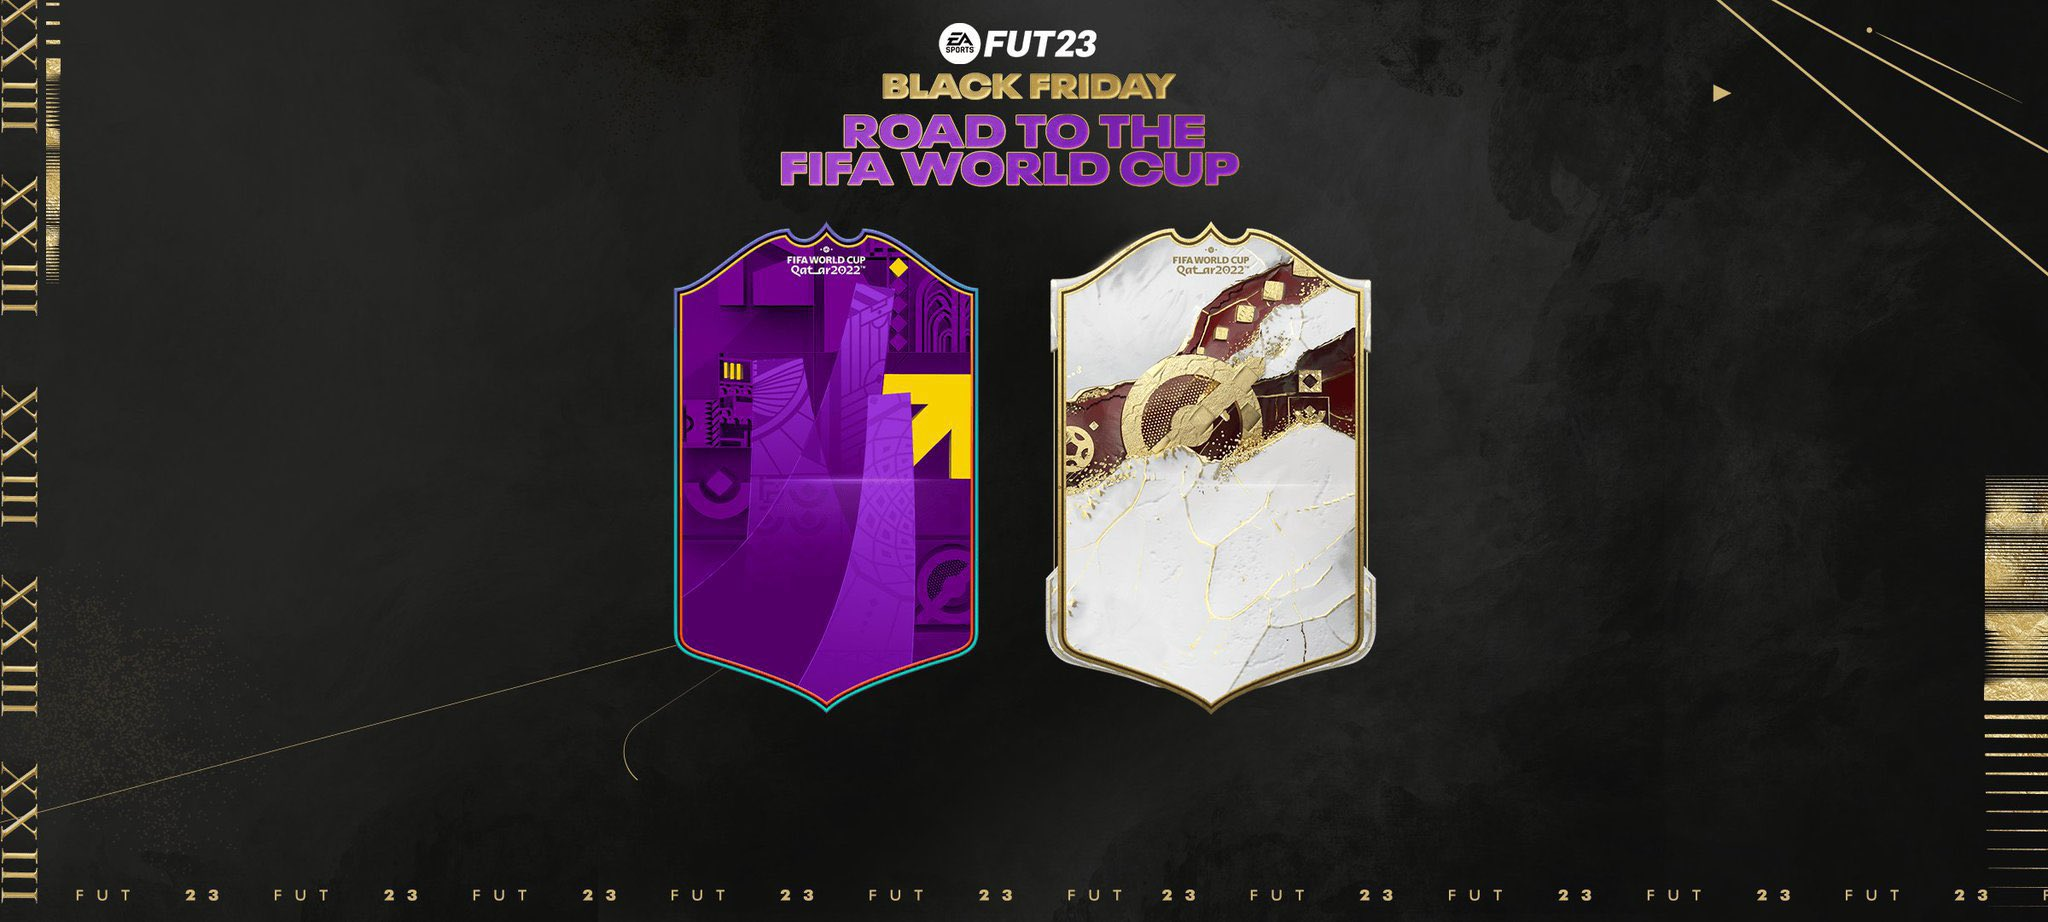 Road to the World Cup promo